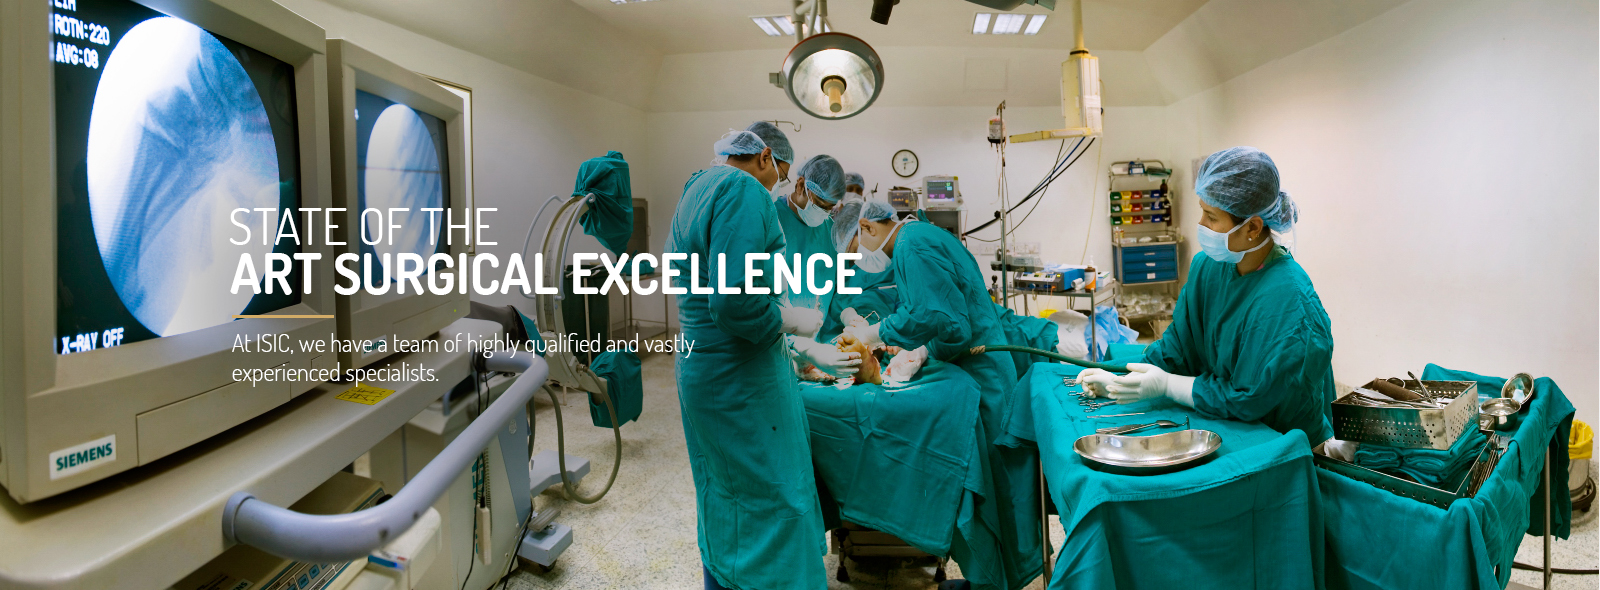 Indensixvideo - Indian Spinal Injuries Centre | Top Super Speciality Spinal Hospitals in  India